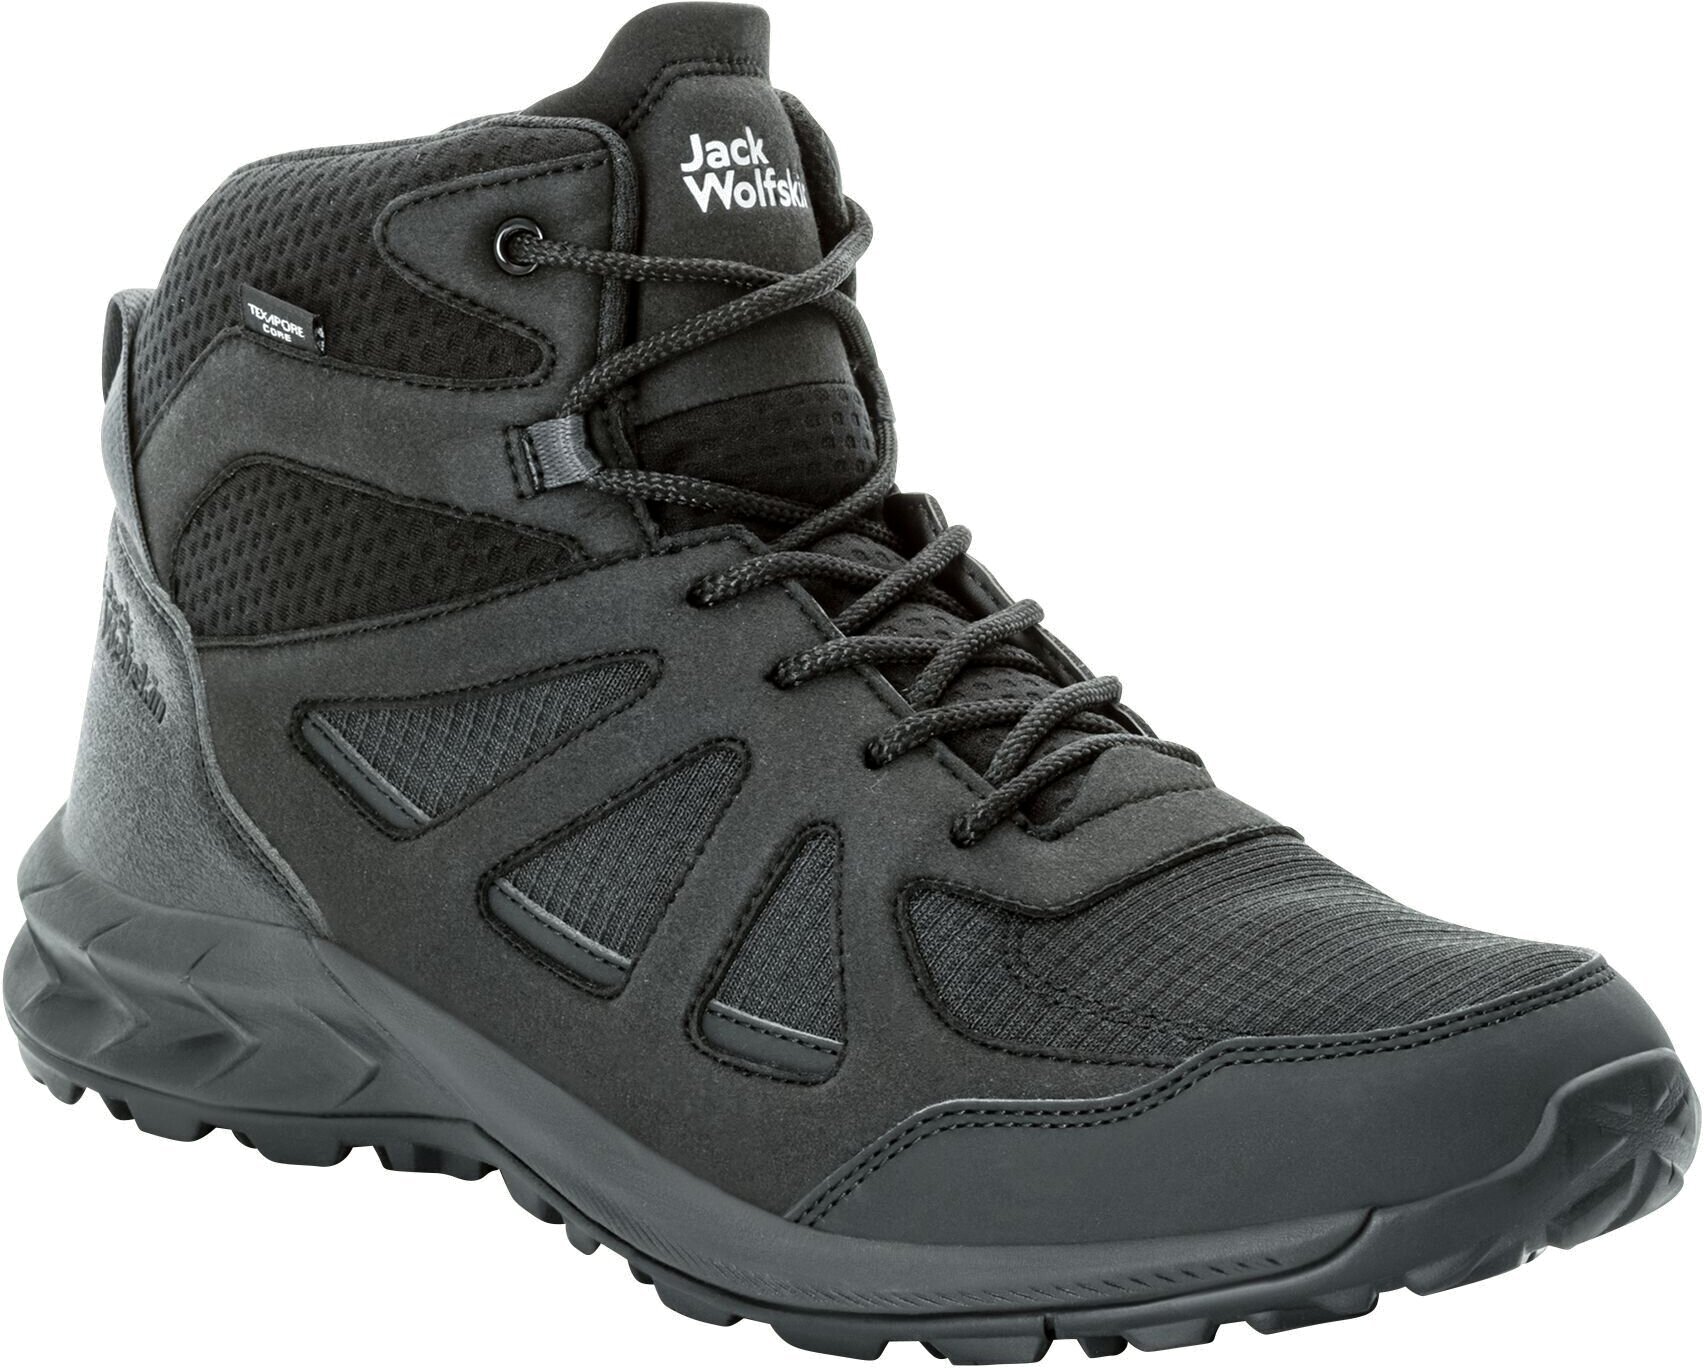 Mens Outdoor Shoes Jack Wolfskin Woodland 2 Texapore Mid M Black 44,5 Mens Outdoor Shoes